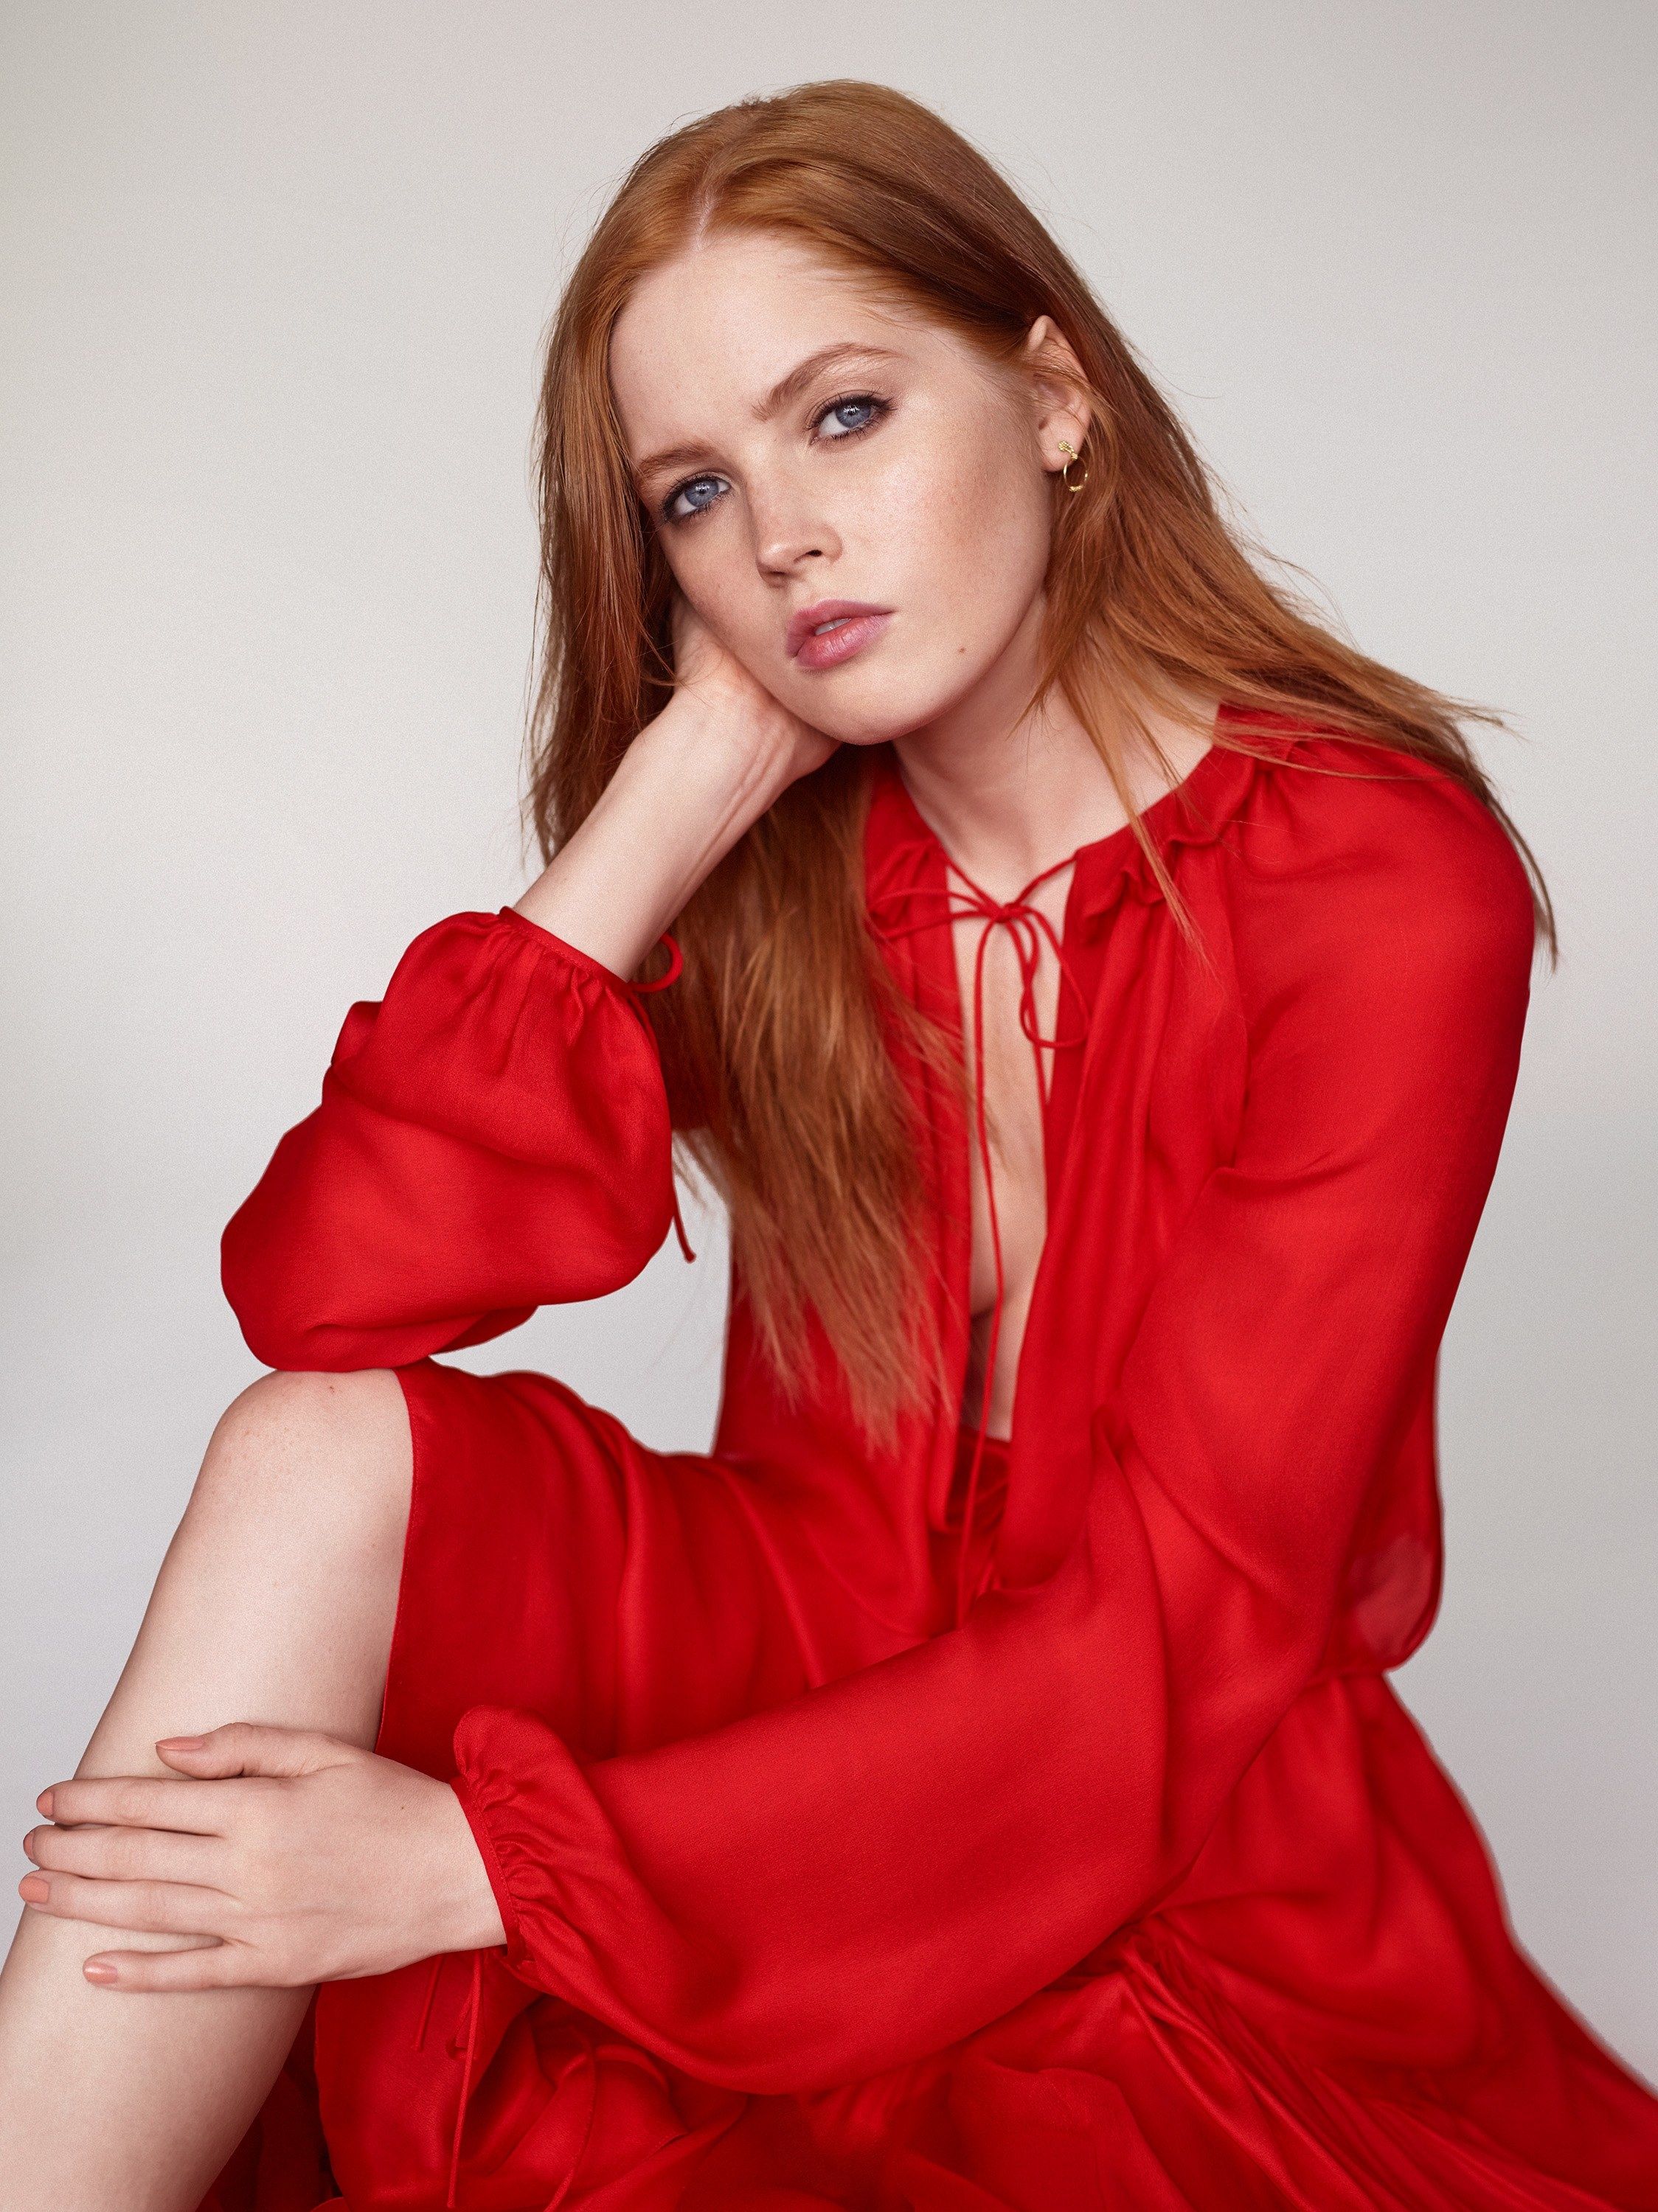 Ellie Bamber Actress Wallpaper, HD Girls 4K Wallpaper, Image, Photo and Background